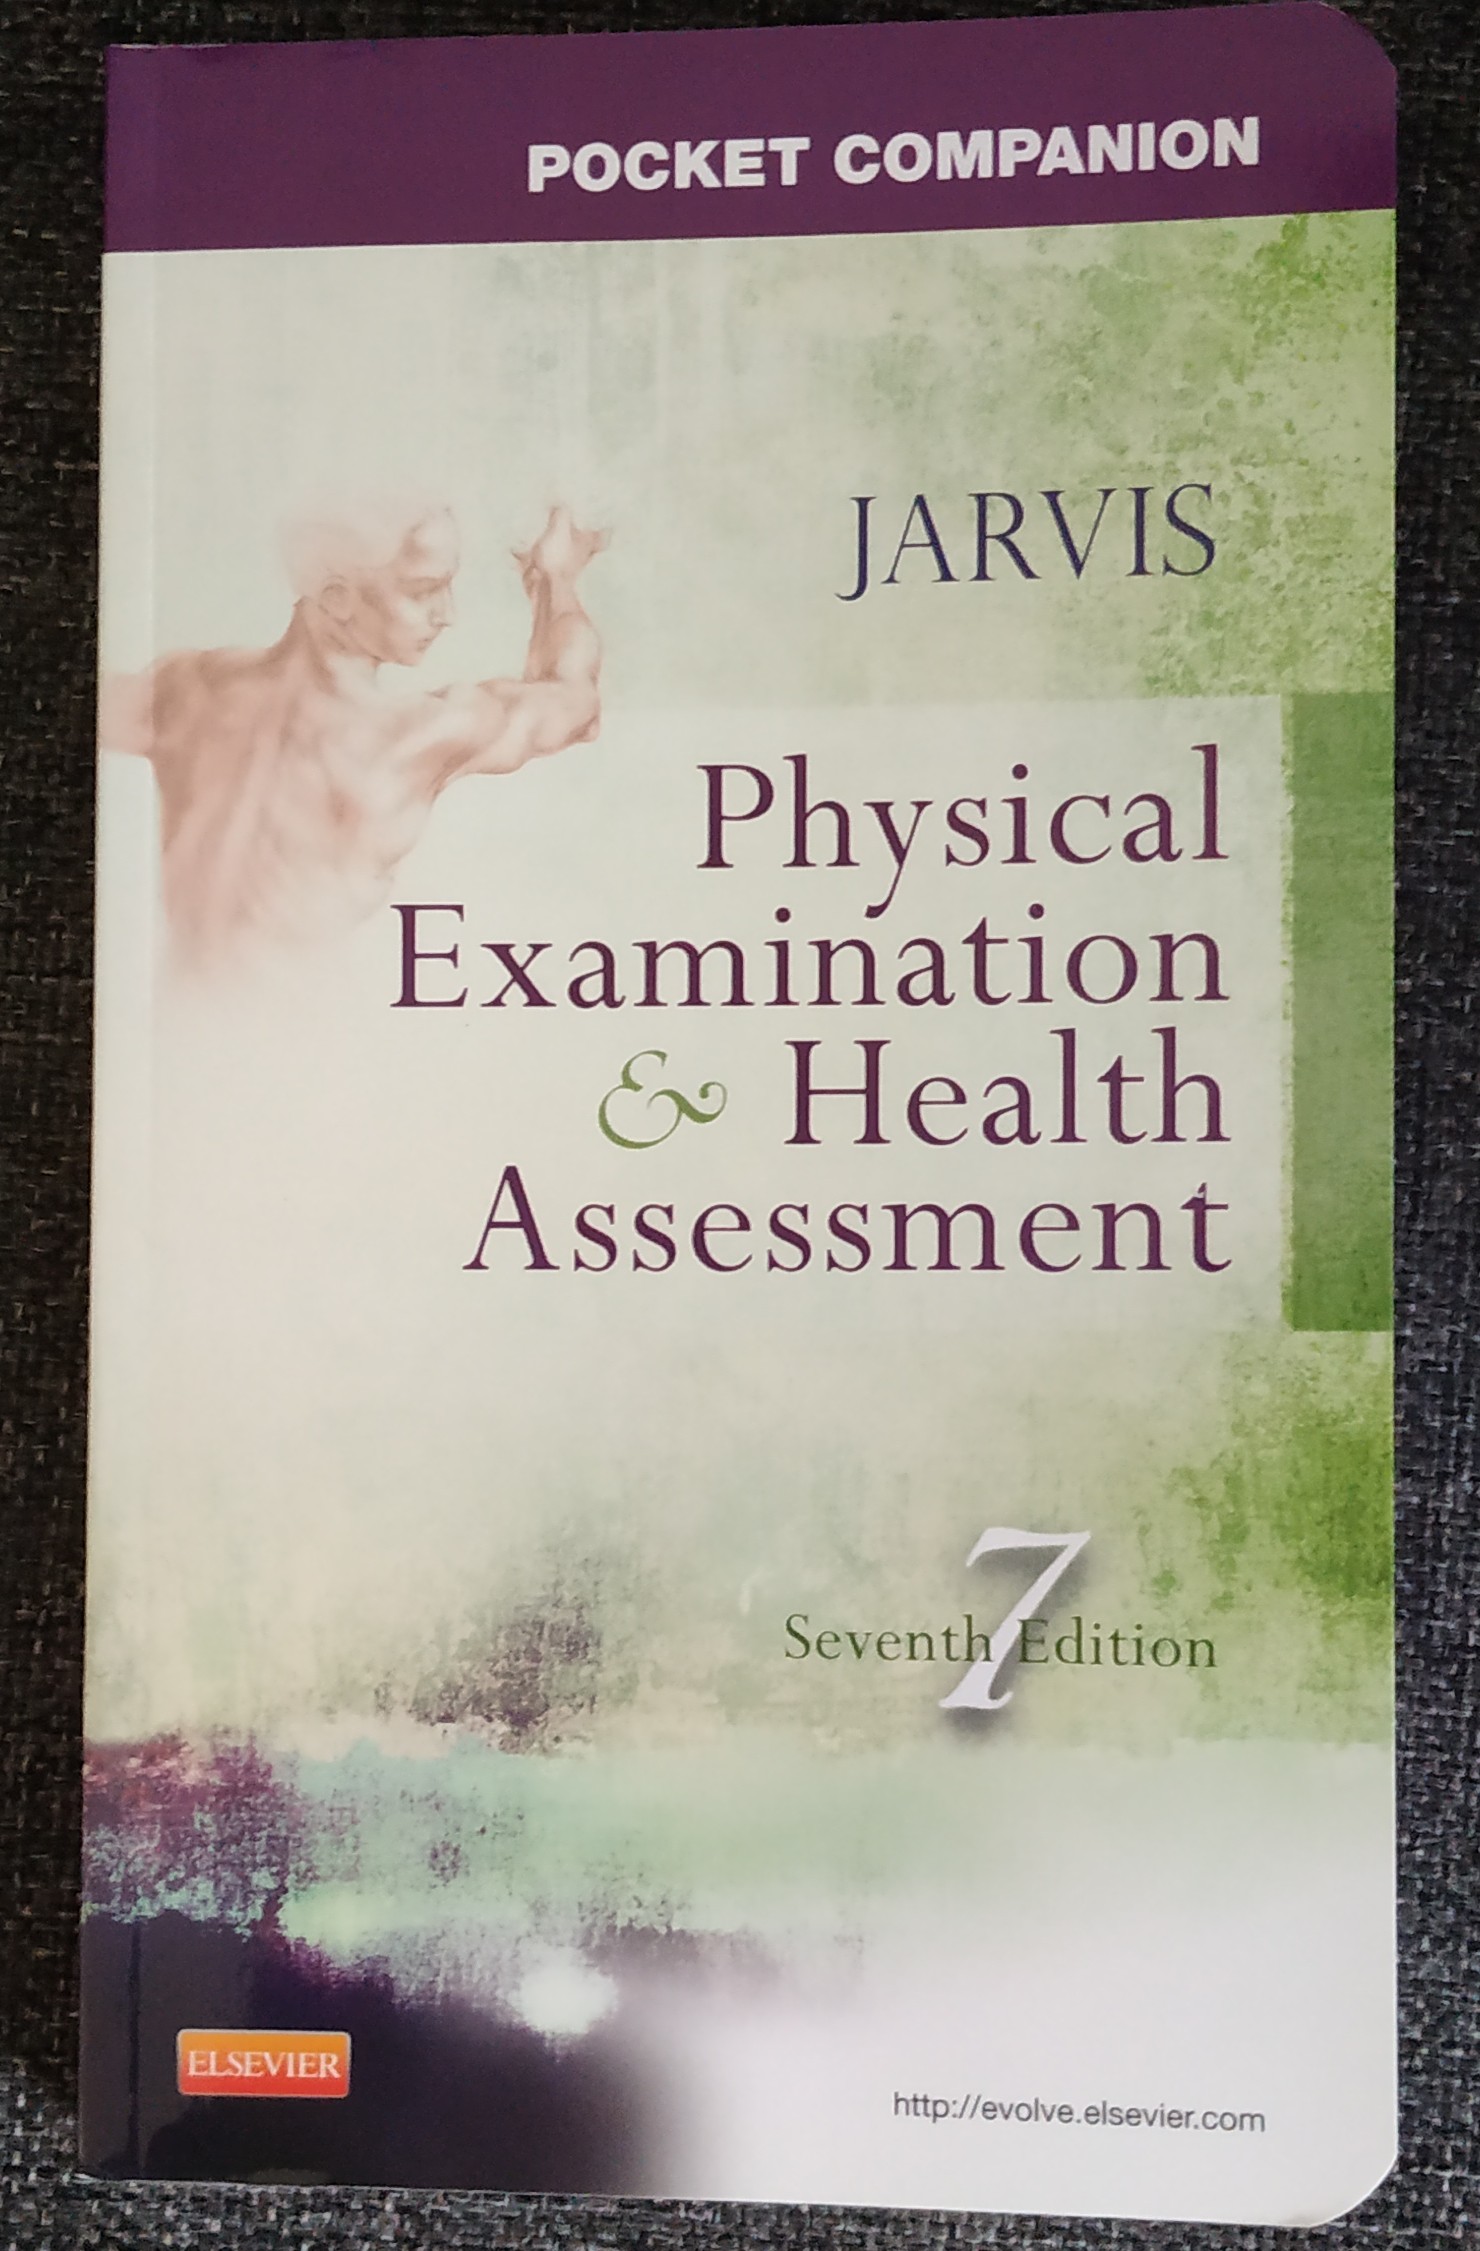 Physical examination & health assessment